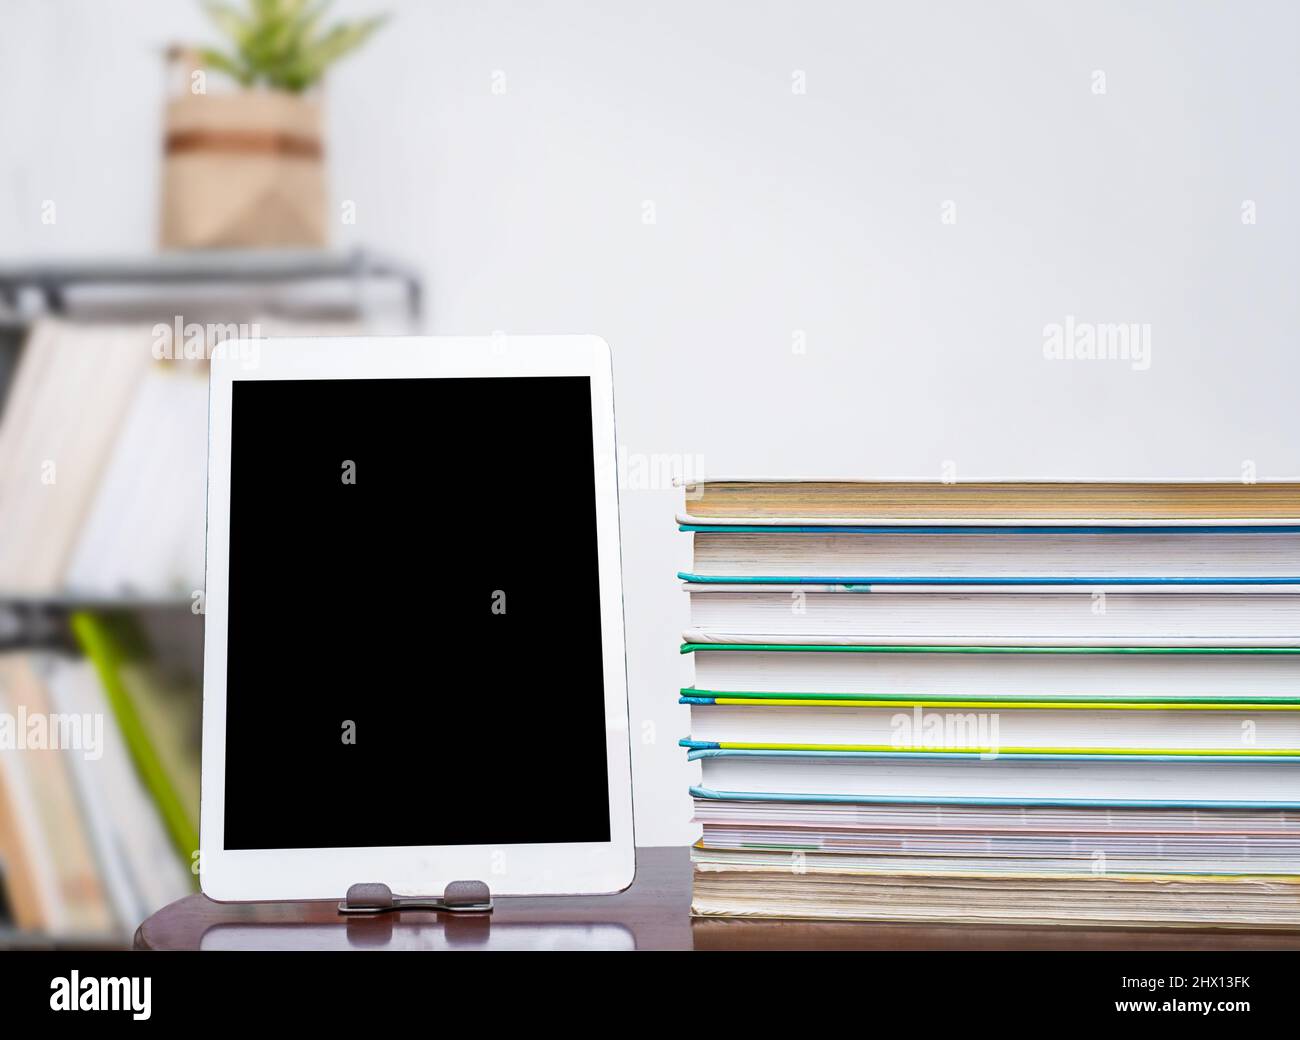 Tablet with copy space next to stack of books on table Stock Photo